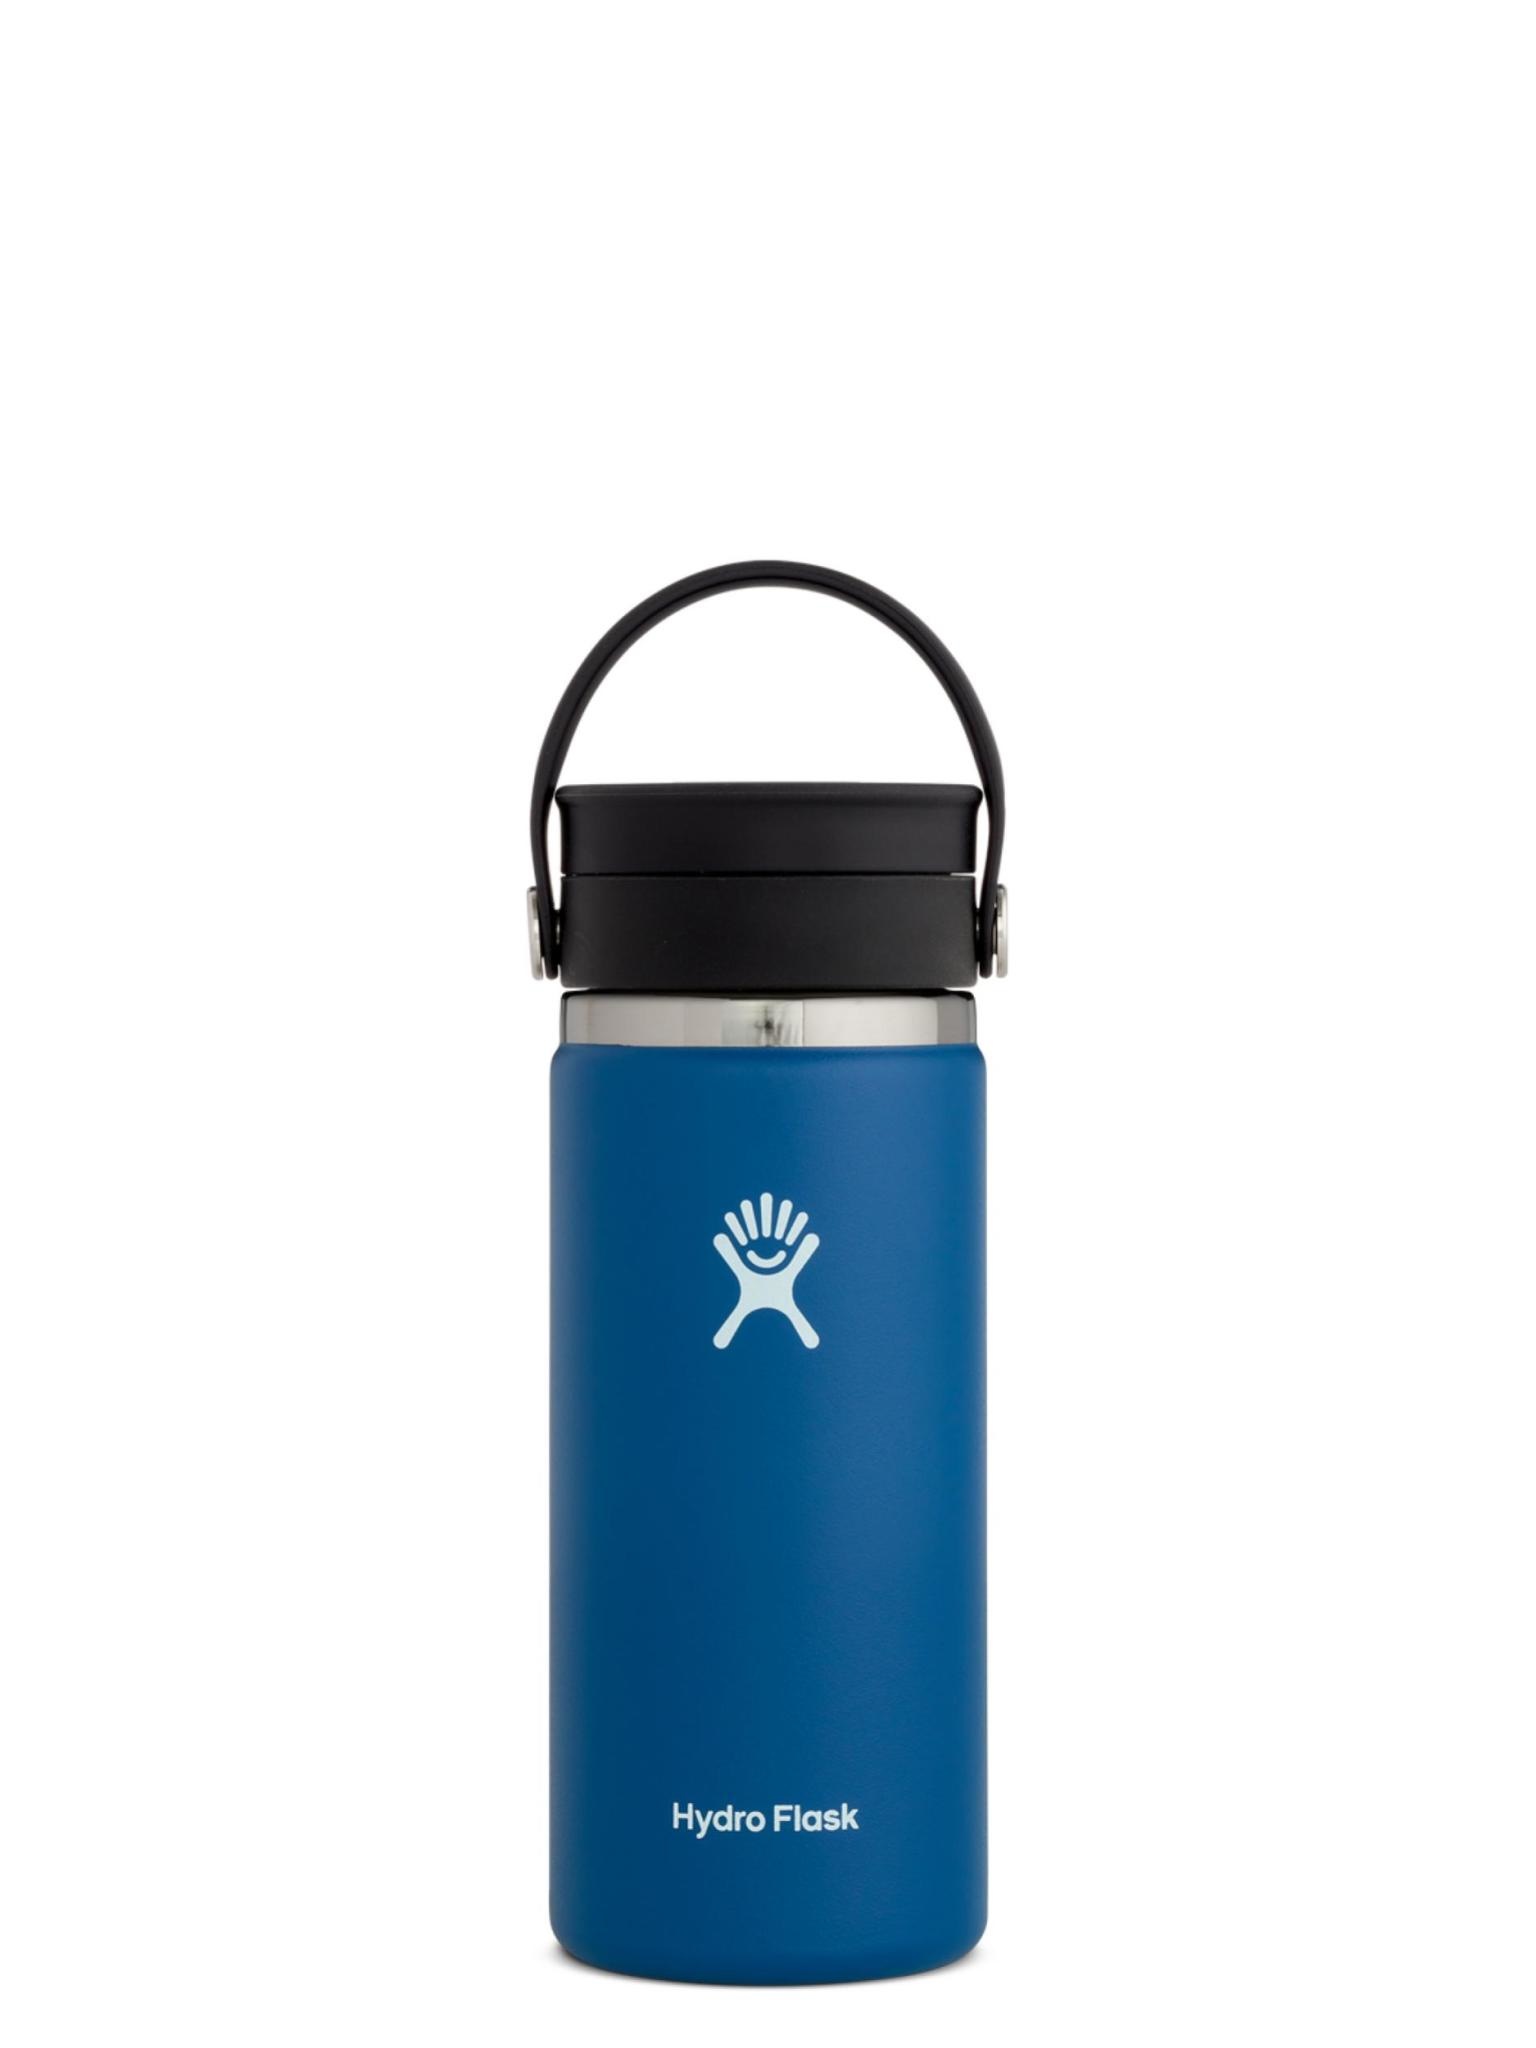 Hydro Flask 16oz Wide Mouth Coffee with Flex Sip Lid Cobalt